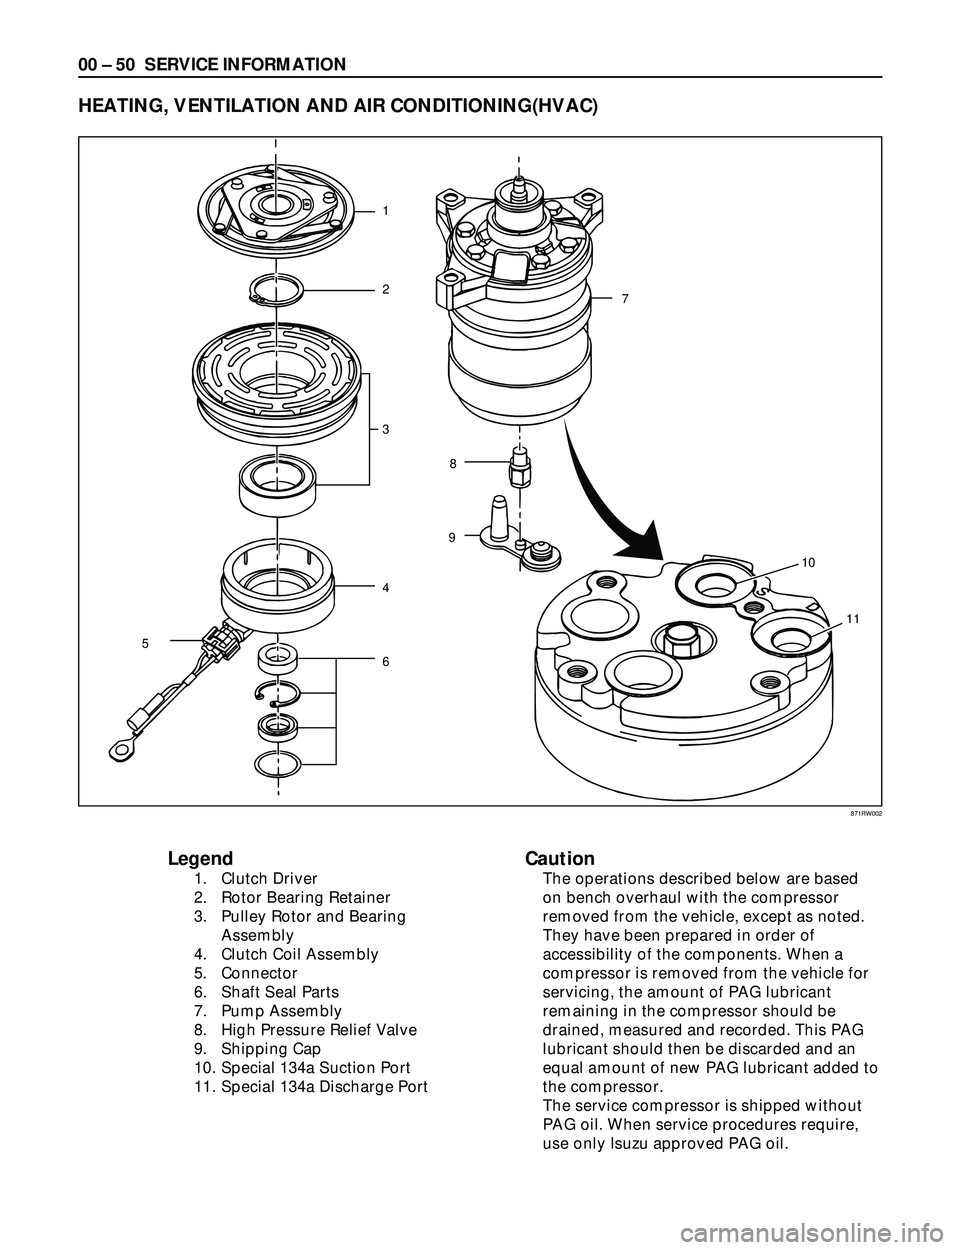 ISUZU TROOPER 1998  Service Repair Manual 00 Ð 50 SERVICE INFORMATION
Legend
1. Clutch Driver
2. Rotor Bearing Retainer
3. Pulley Rotor and Bearing
Assembly
4. Clutch Coil Assembly
5. Connector
6. Shaft Seal Parts
7. Pump Assembly
8. High Pr